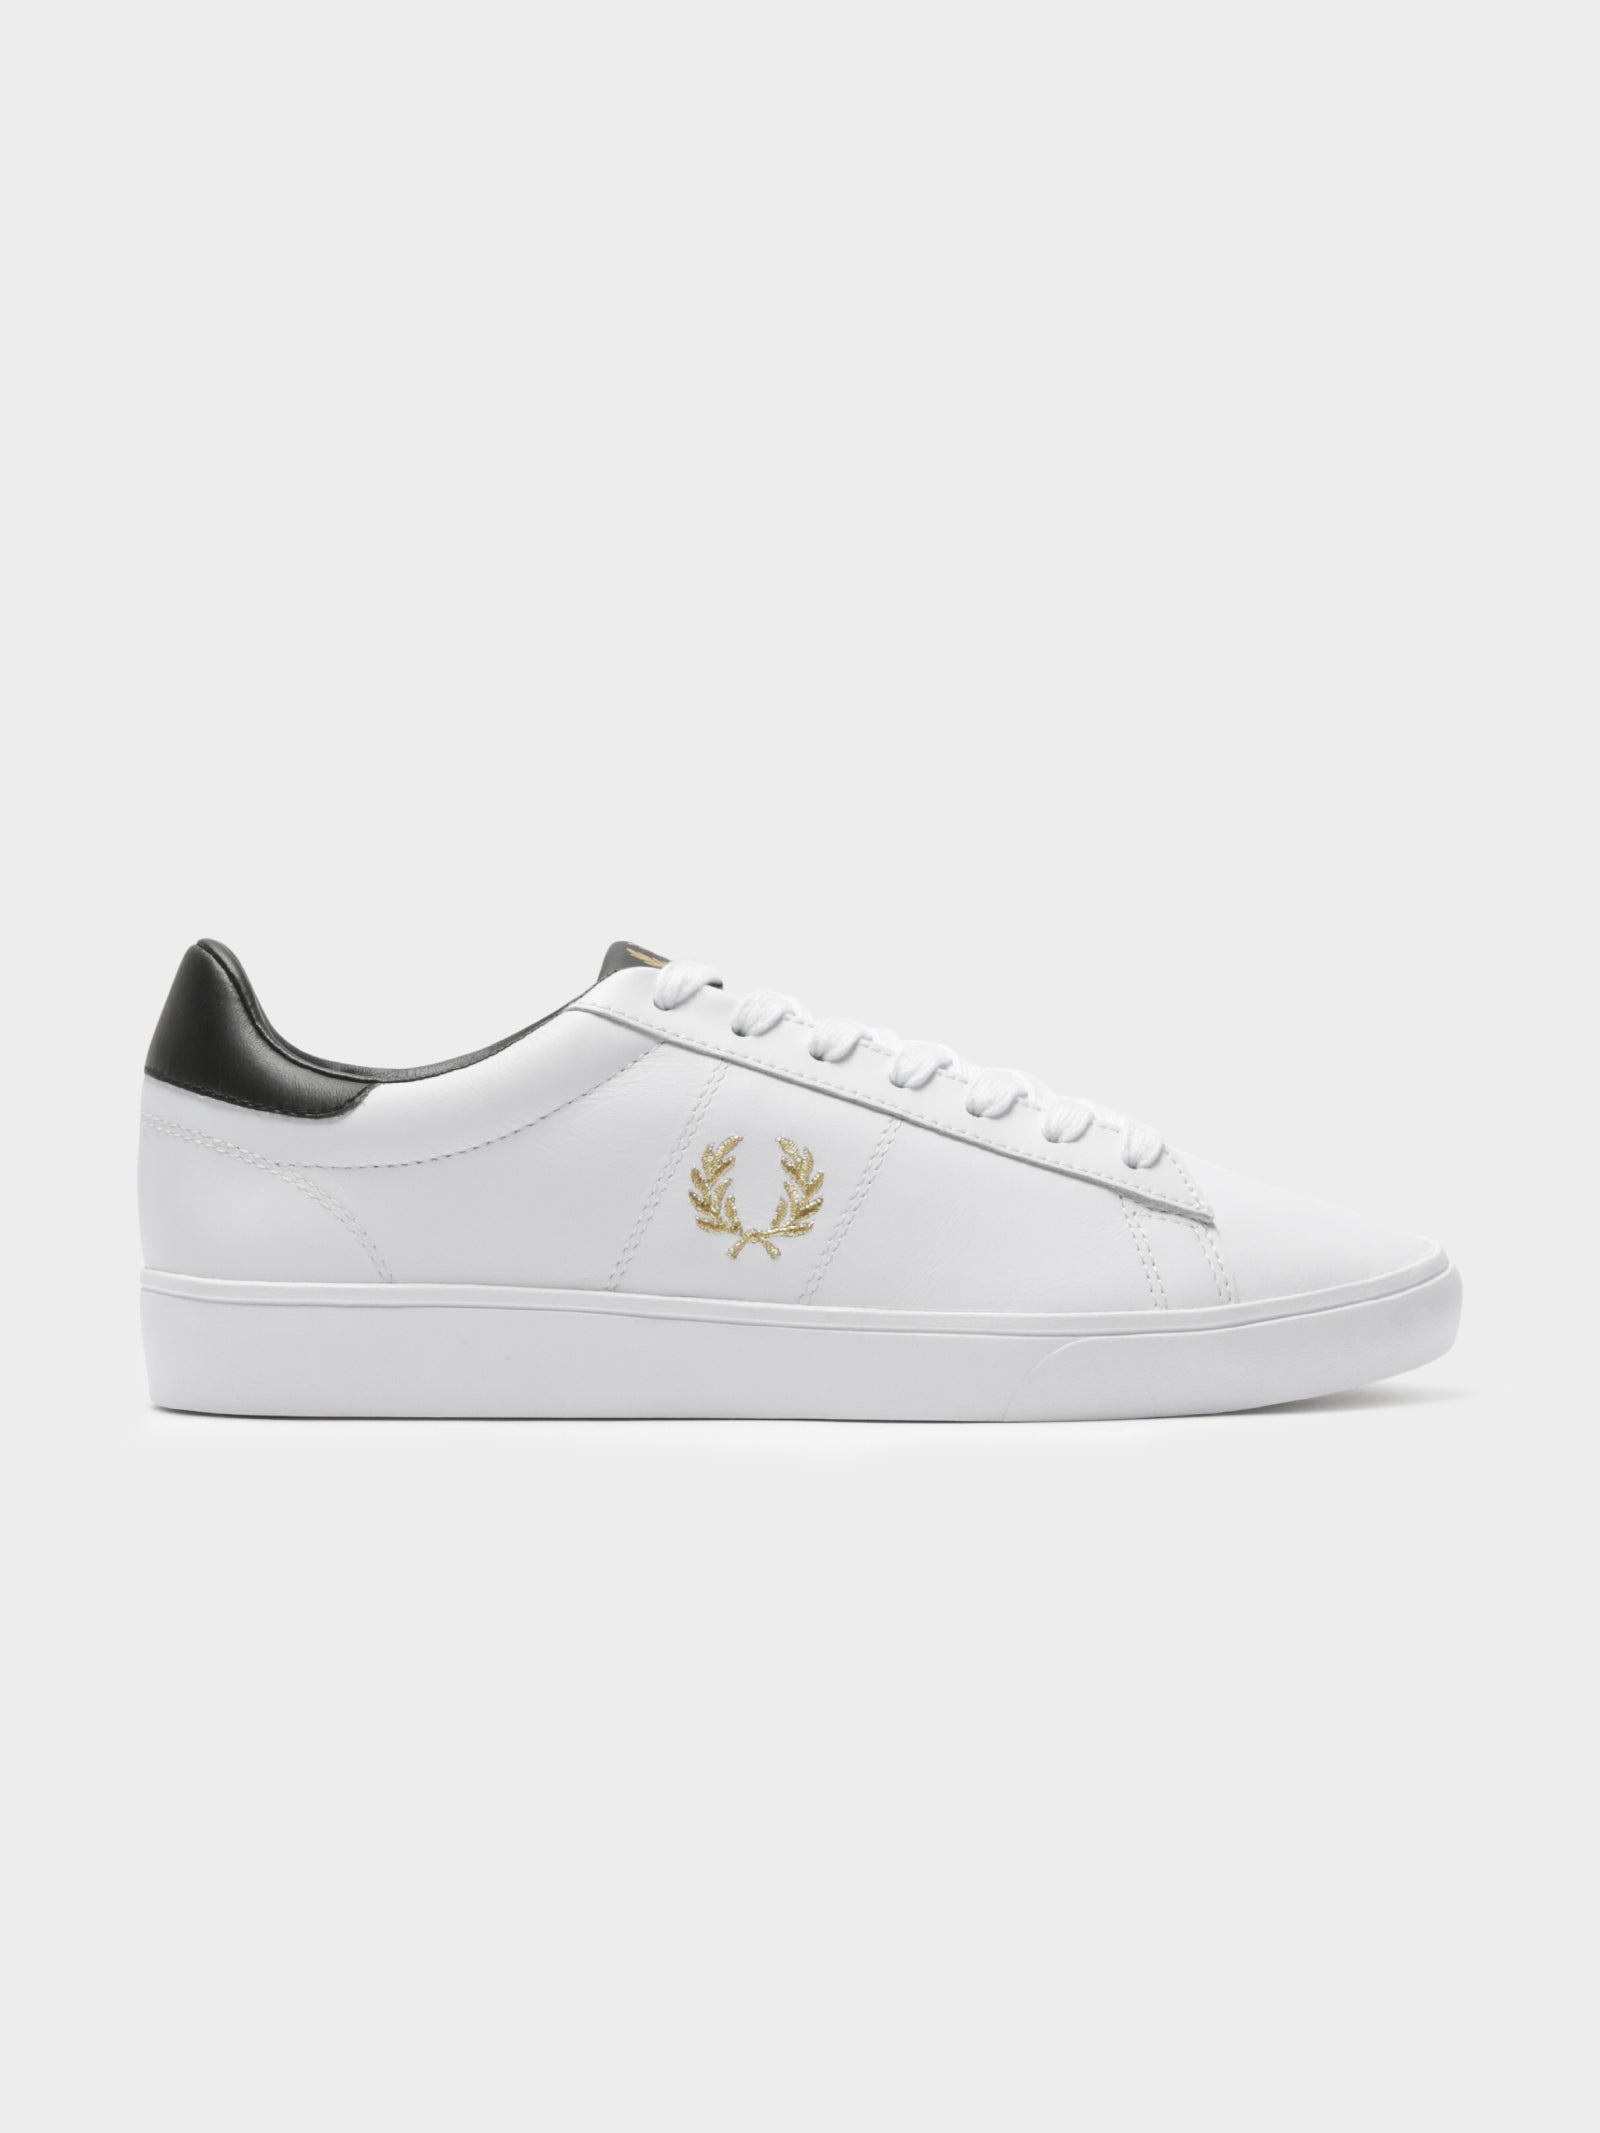 Mens Spencer Leather Sneakers in White & Gold - Glue Store